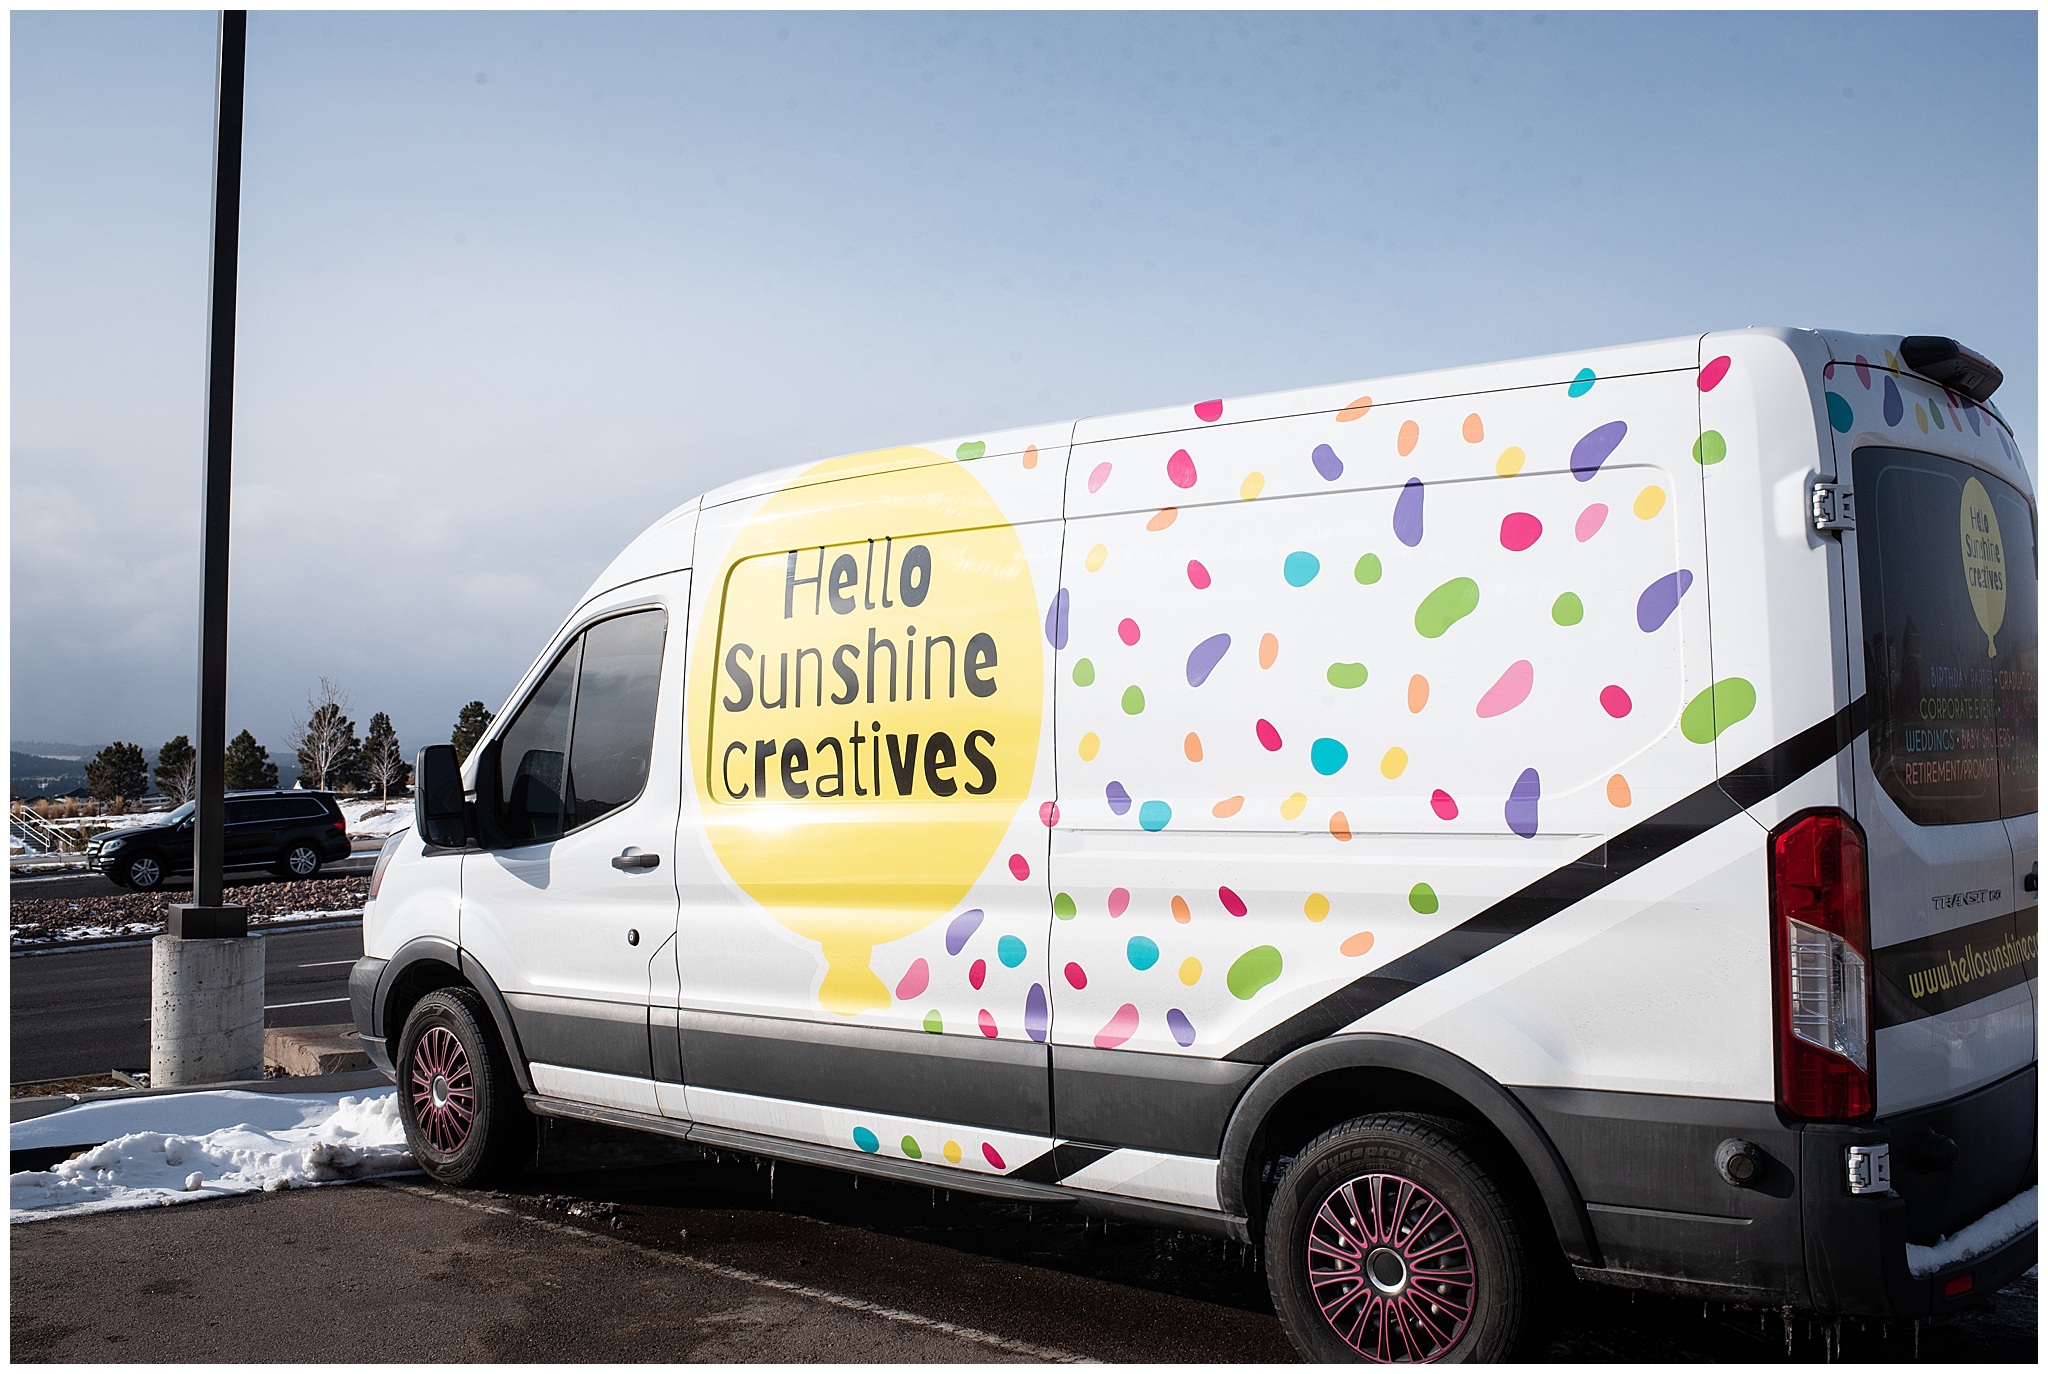 Hello Sunshine Creative sprinter van sits parked in a parking lot balloons colorado springs co